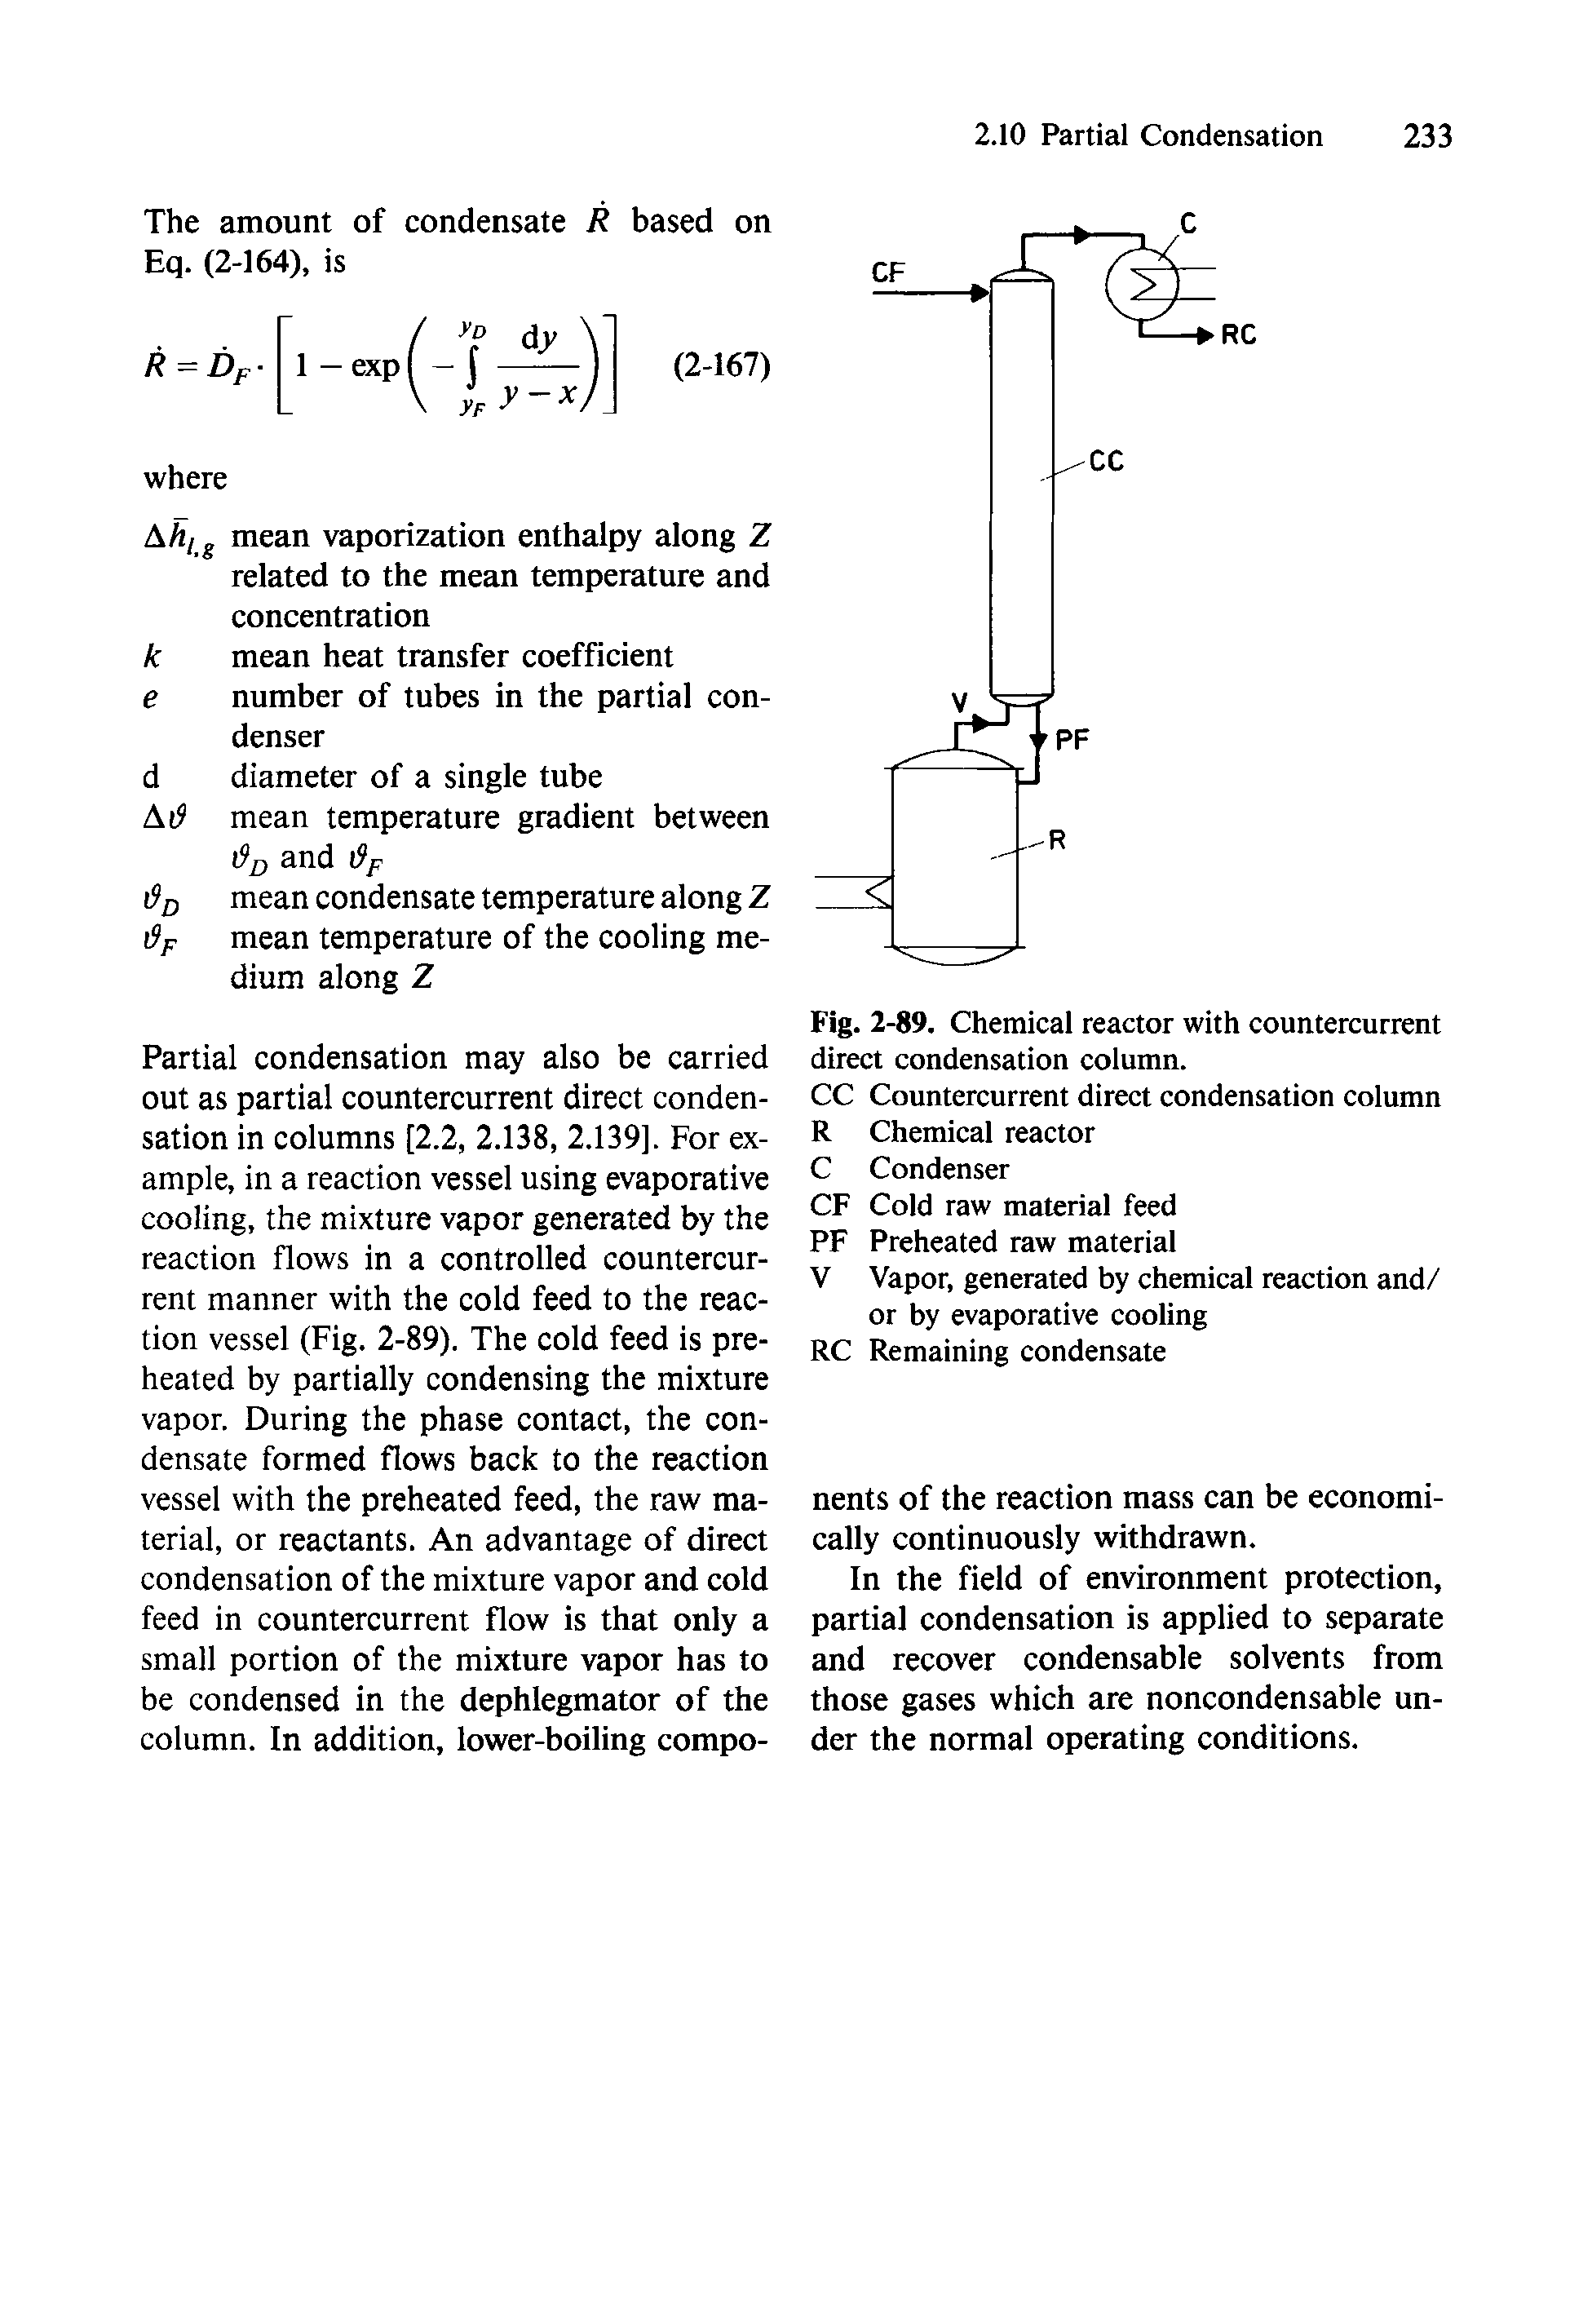 Fig. 2-89. Chemical reactor with countercurrent direct condensation column.